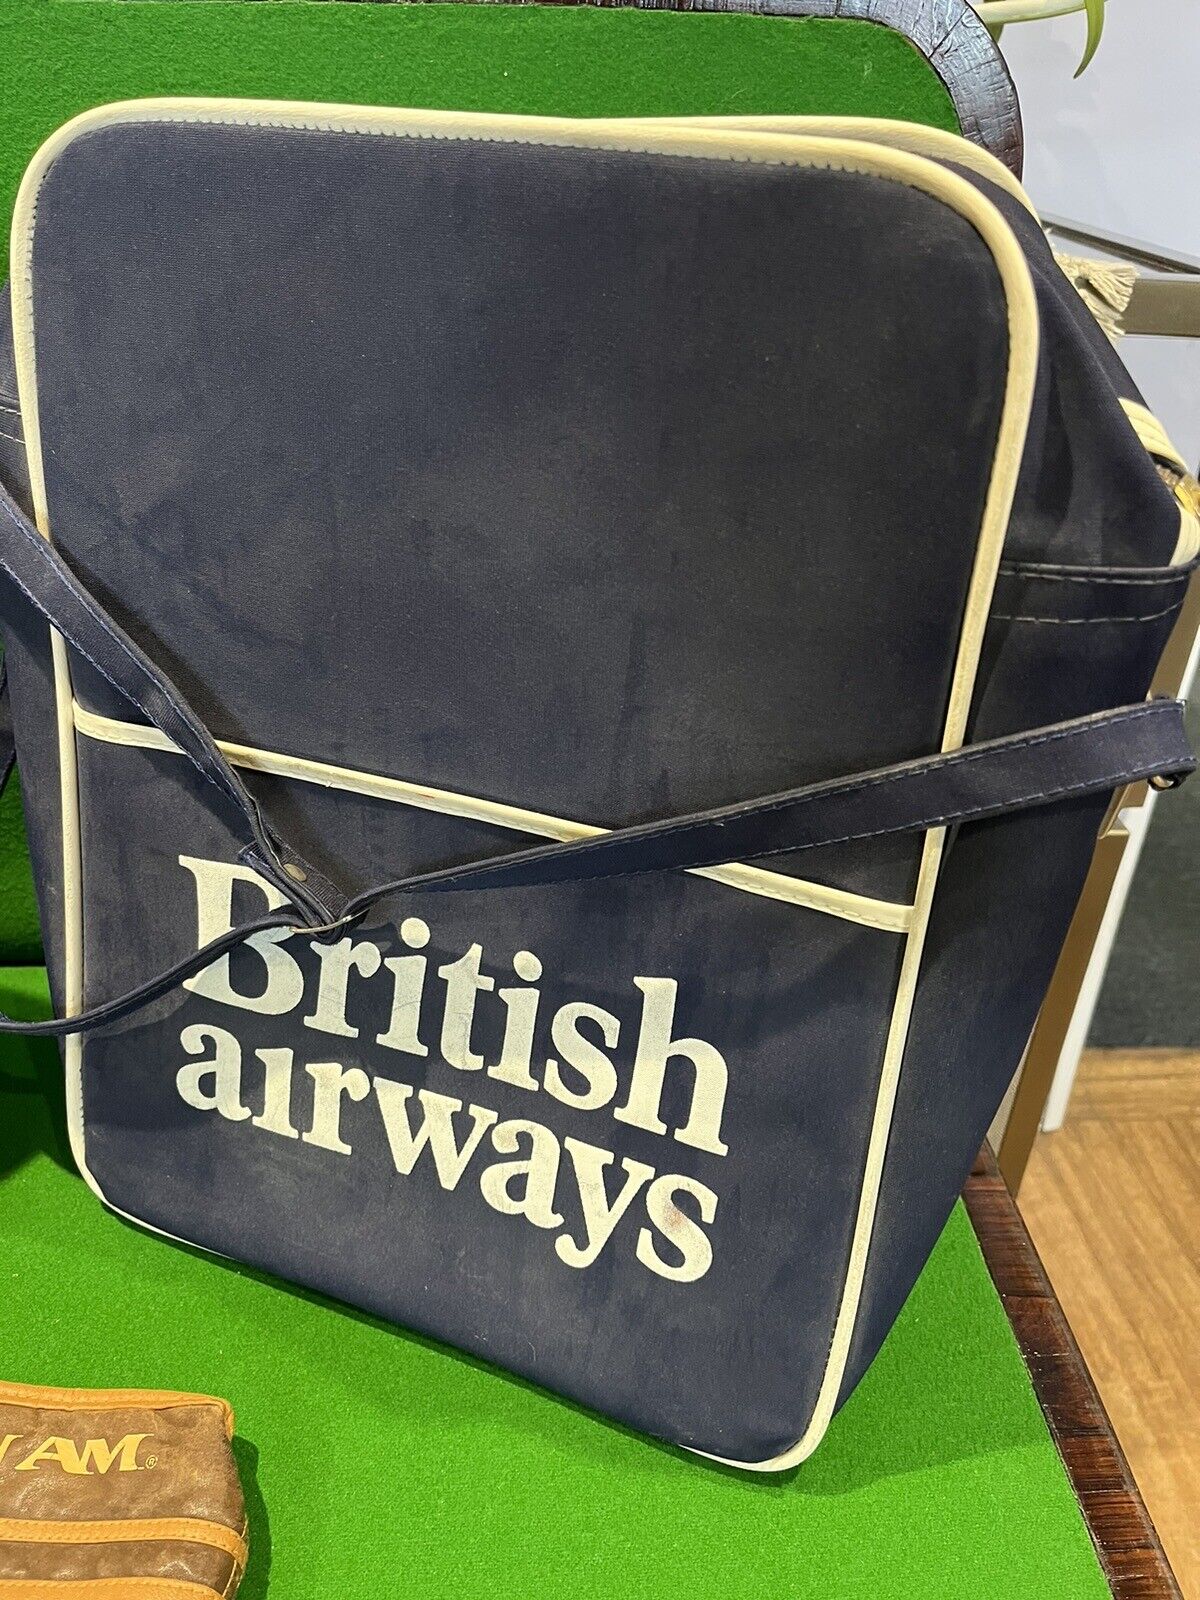 Vintage British Airways, Pan-am & Monarch airlines Flight Bags And Small Bag